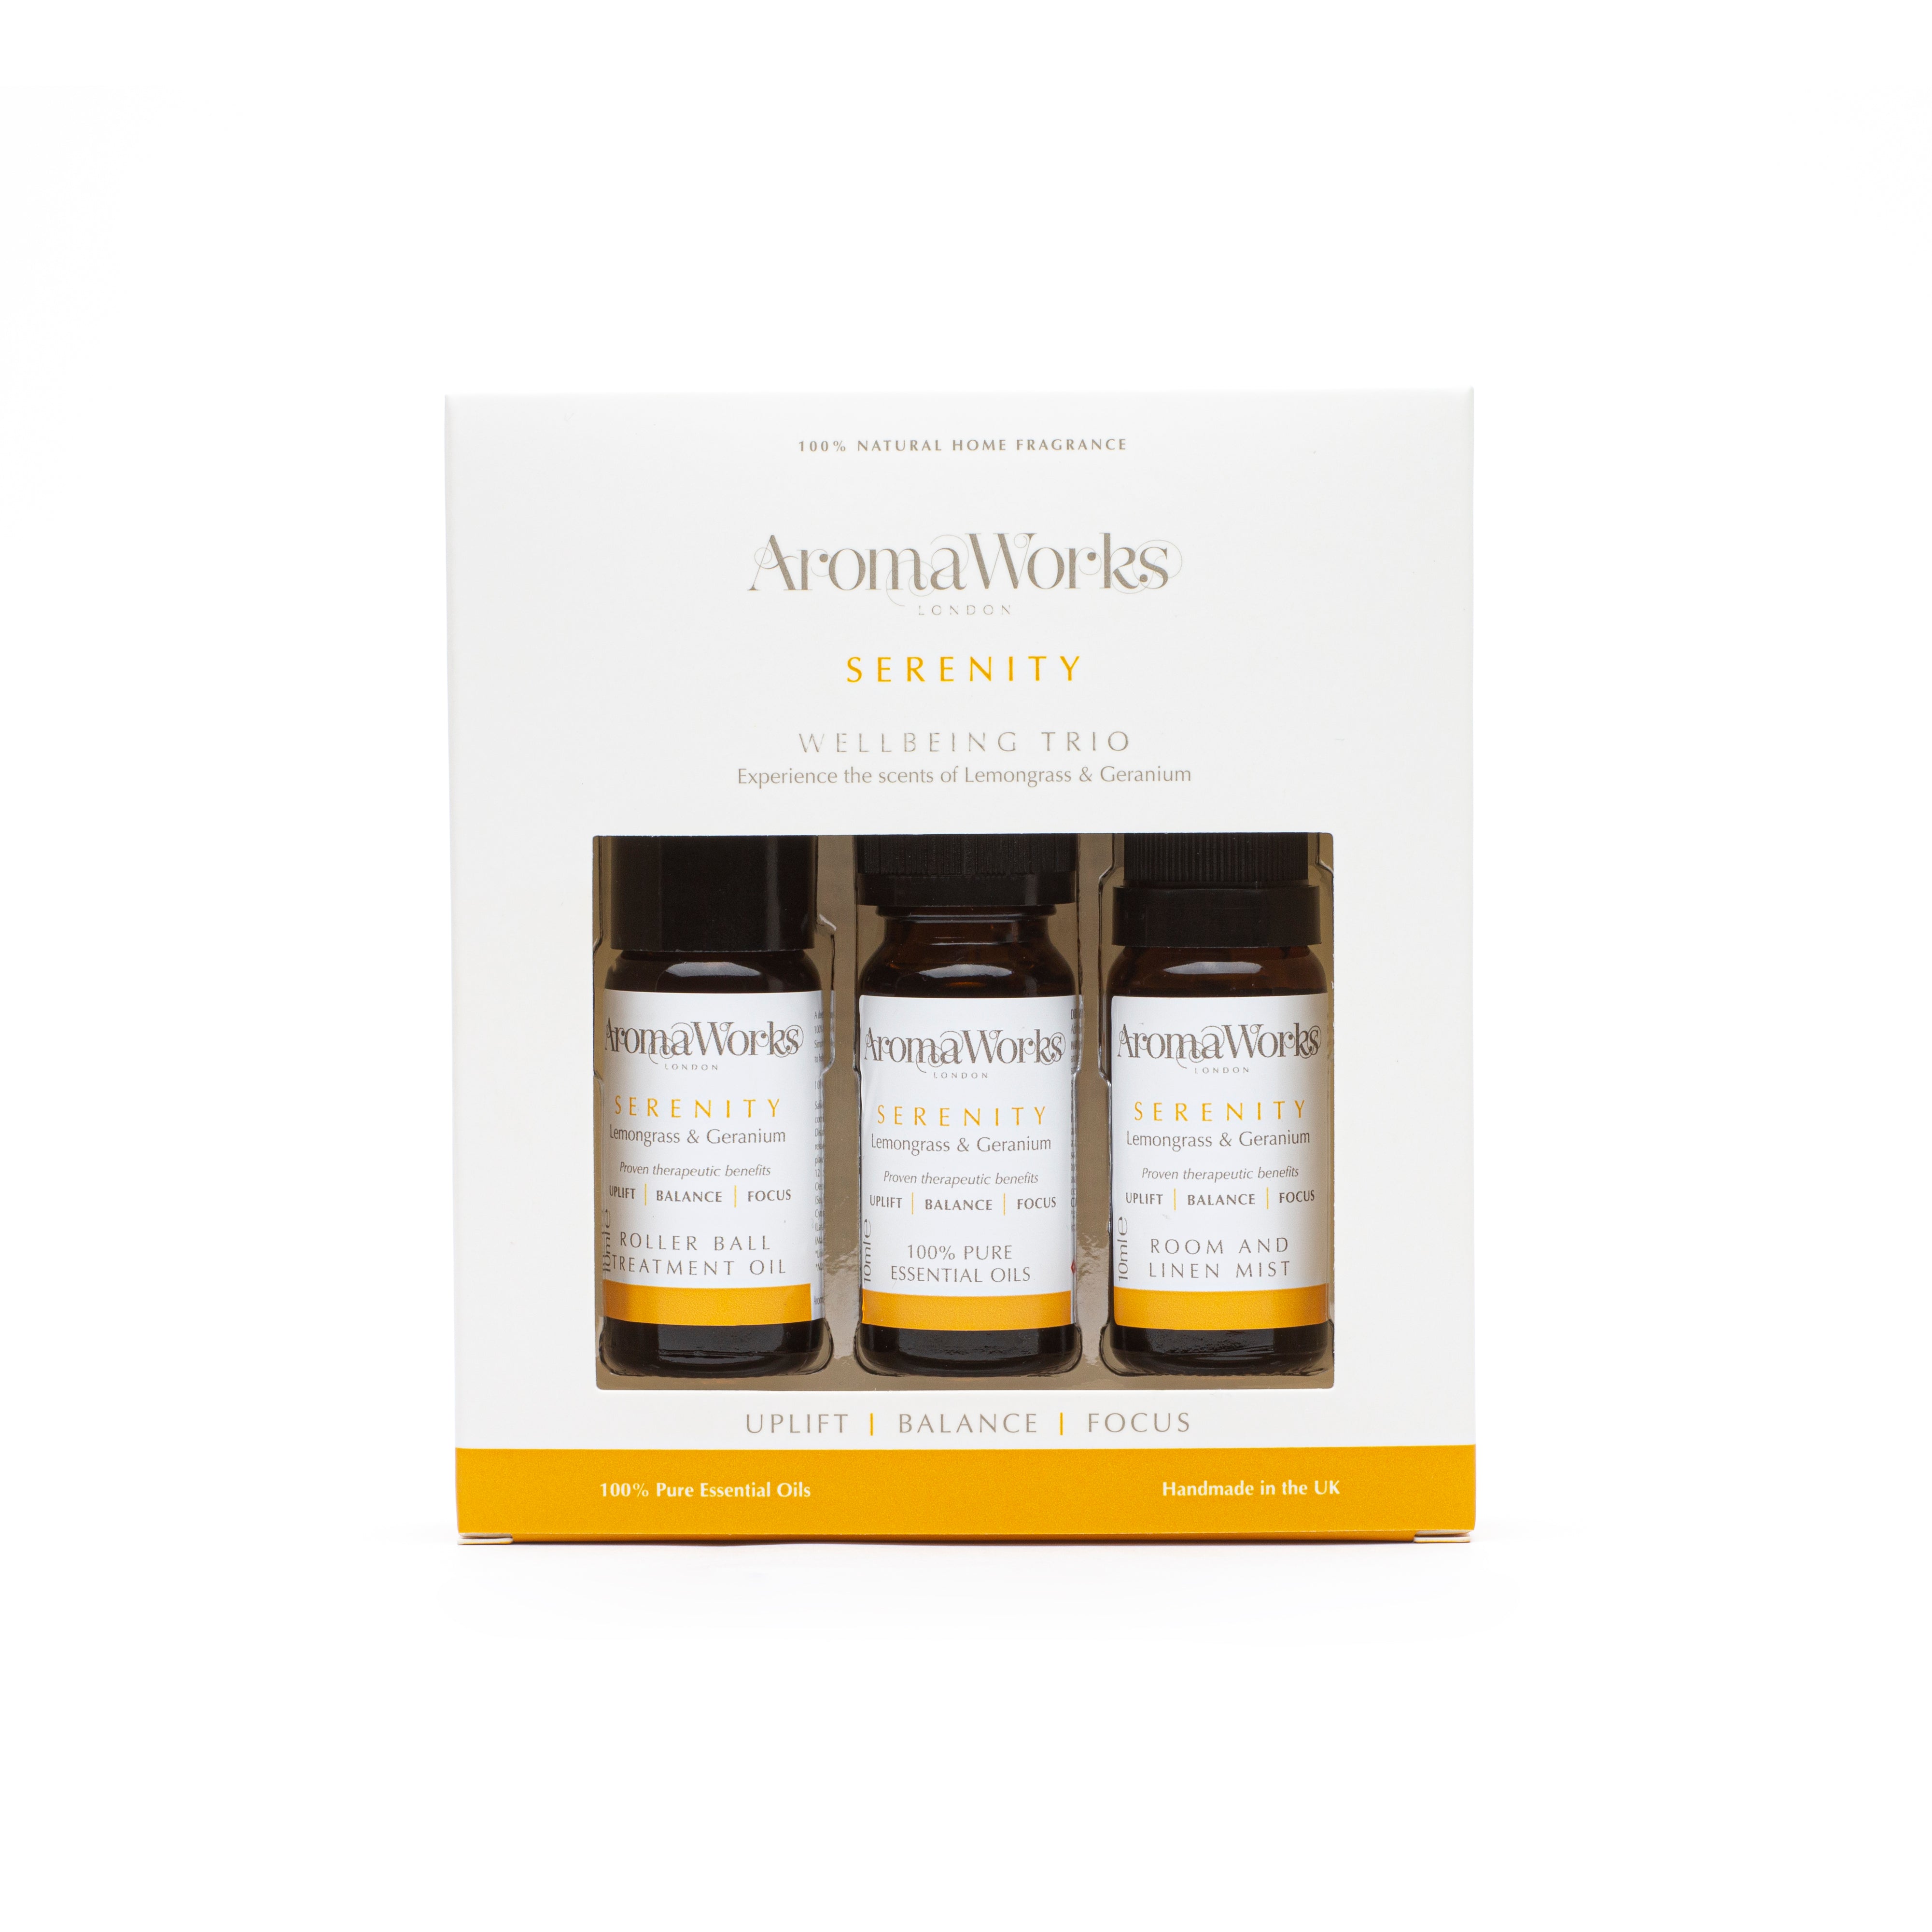 Serenity Wellbeing Trio 3 x 10ml products